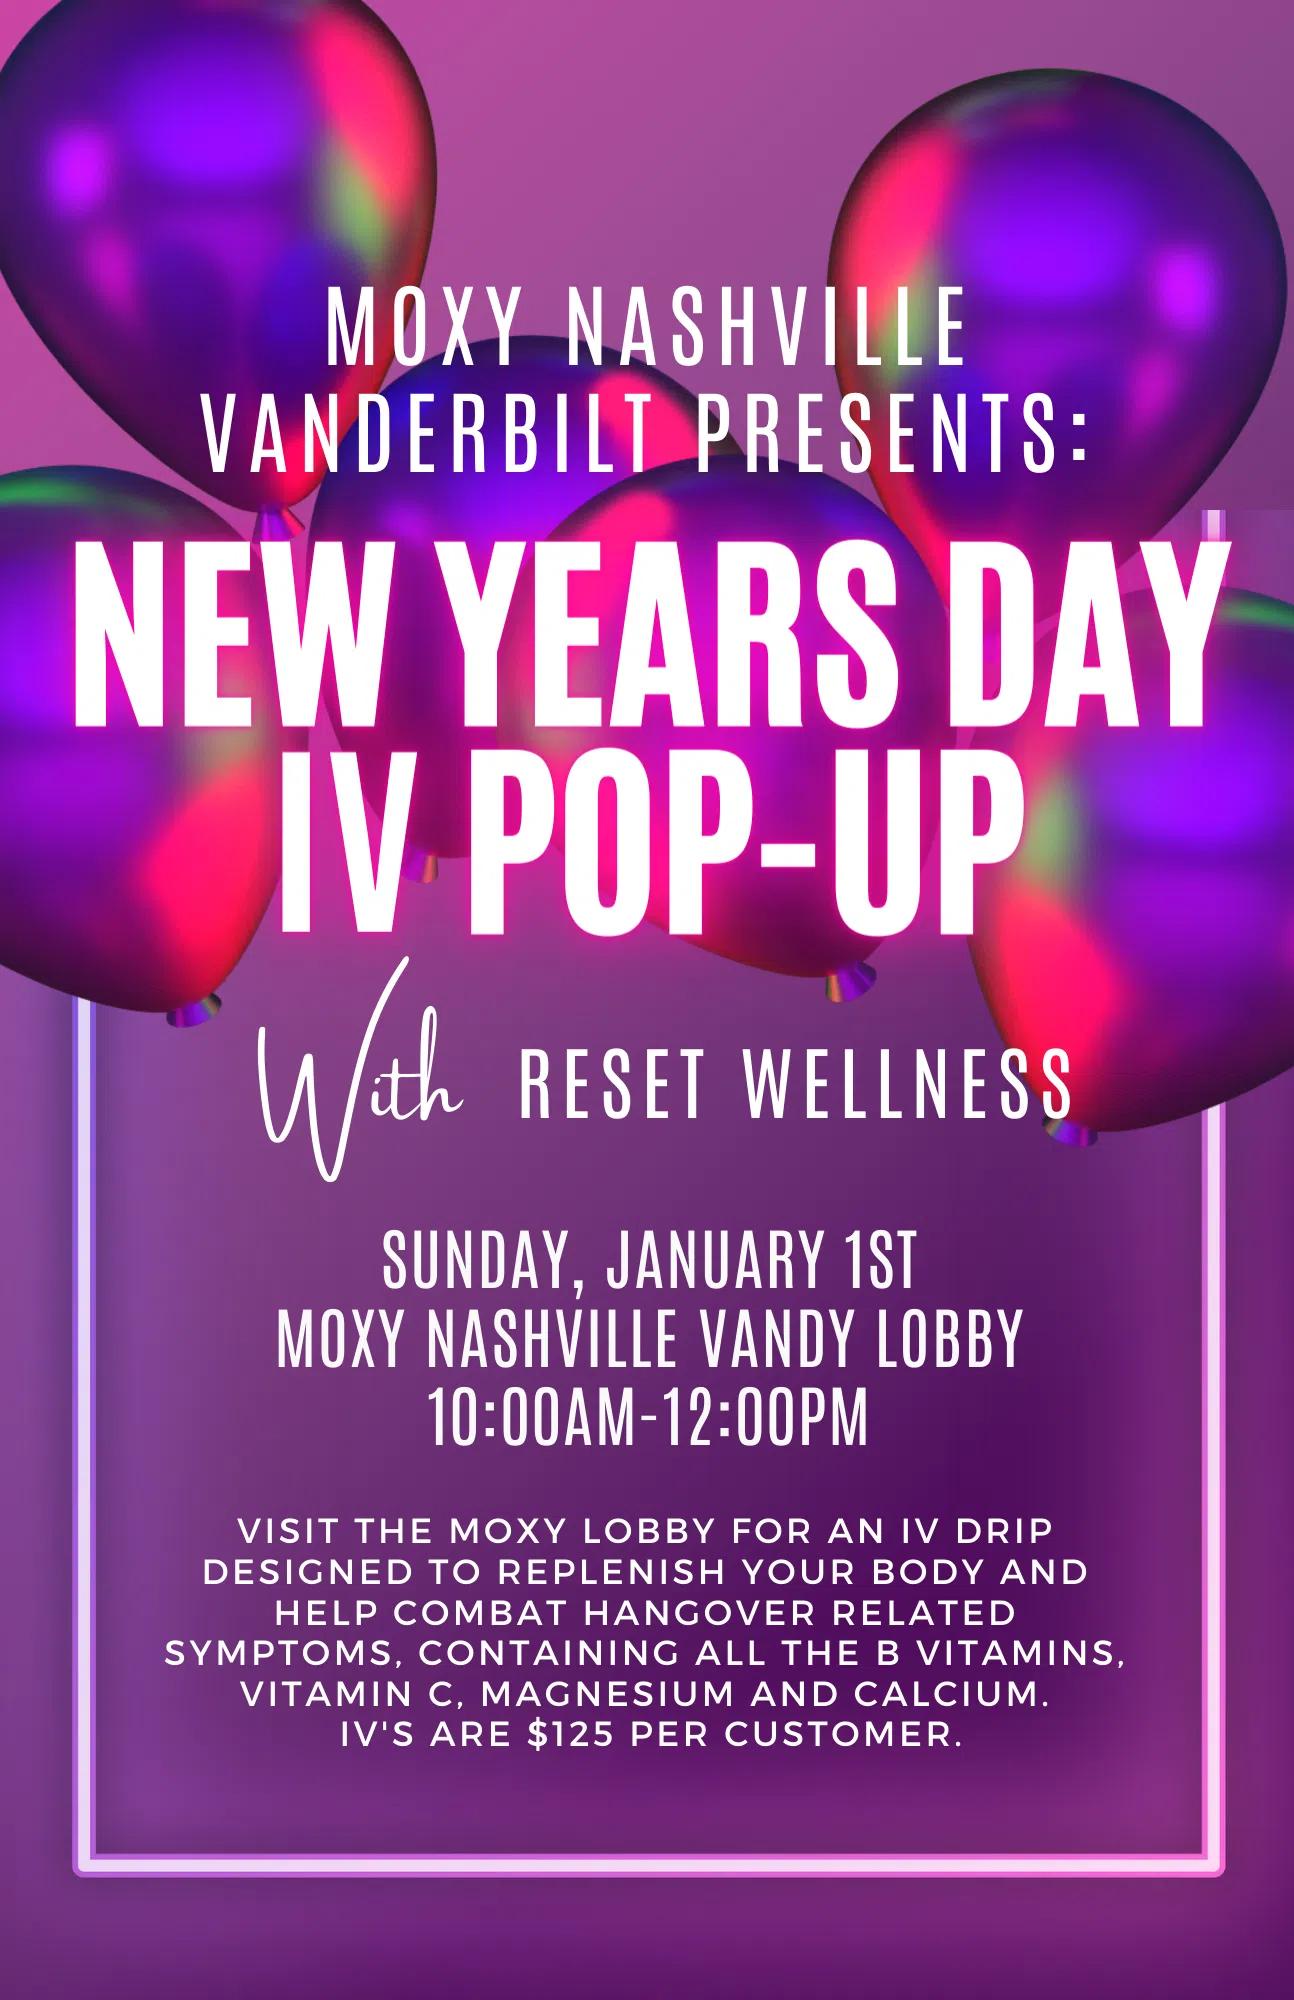 New Years Day IV Pop-Up with Reset Wellness